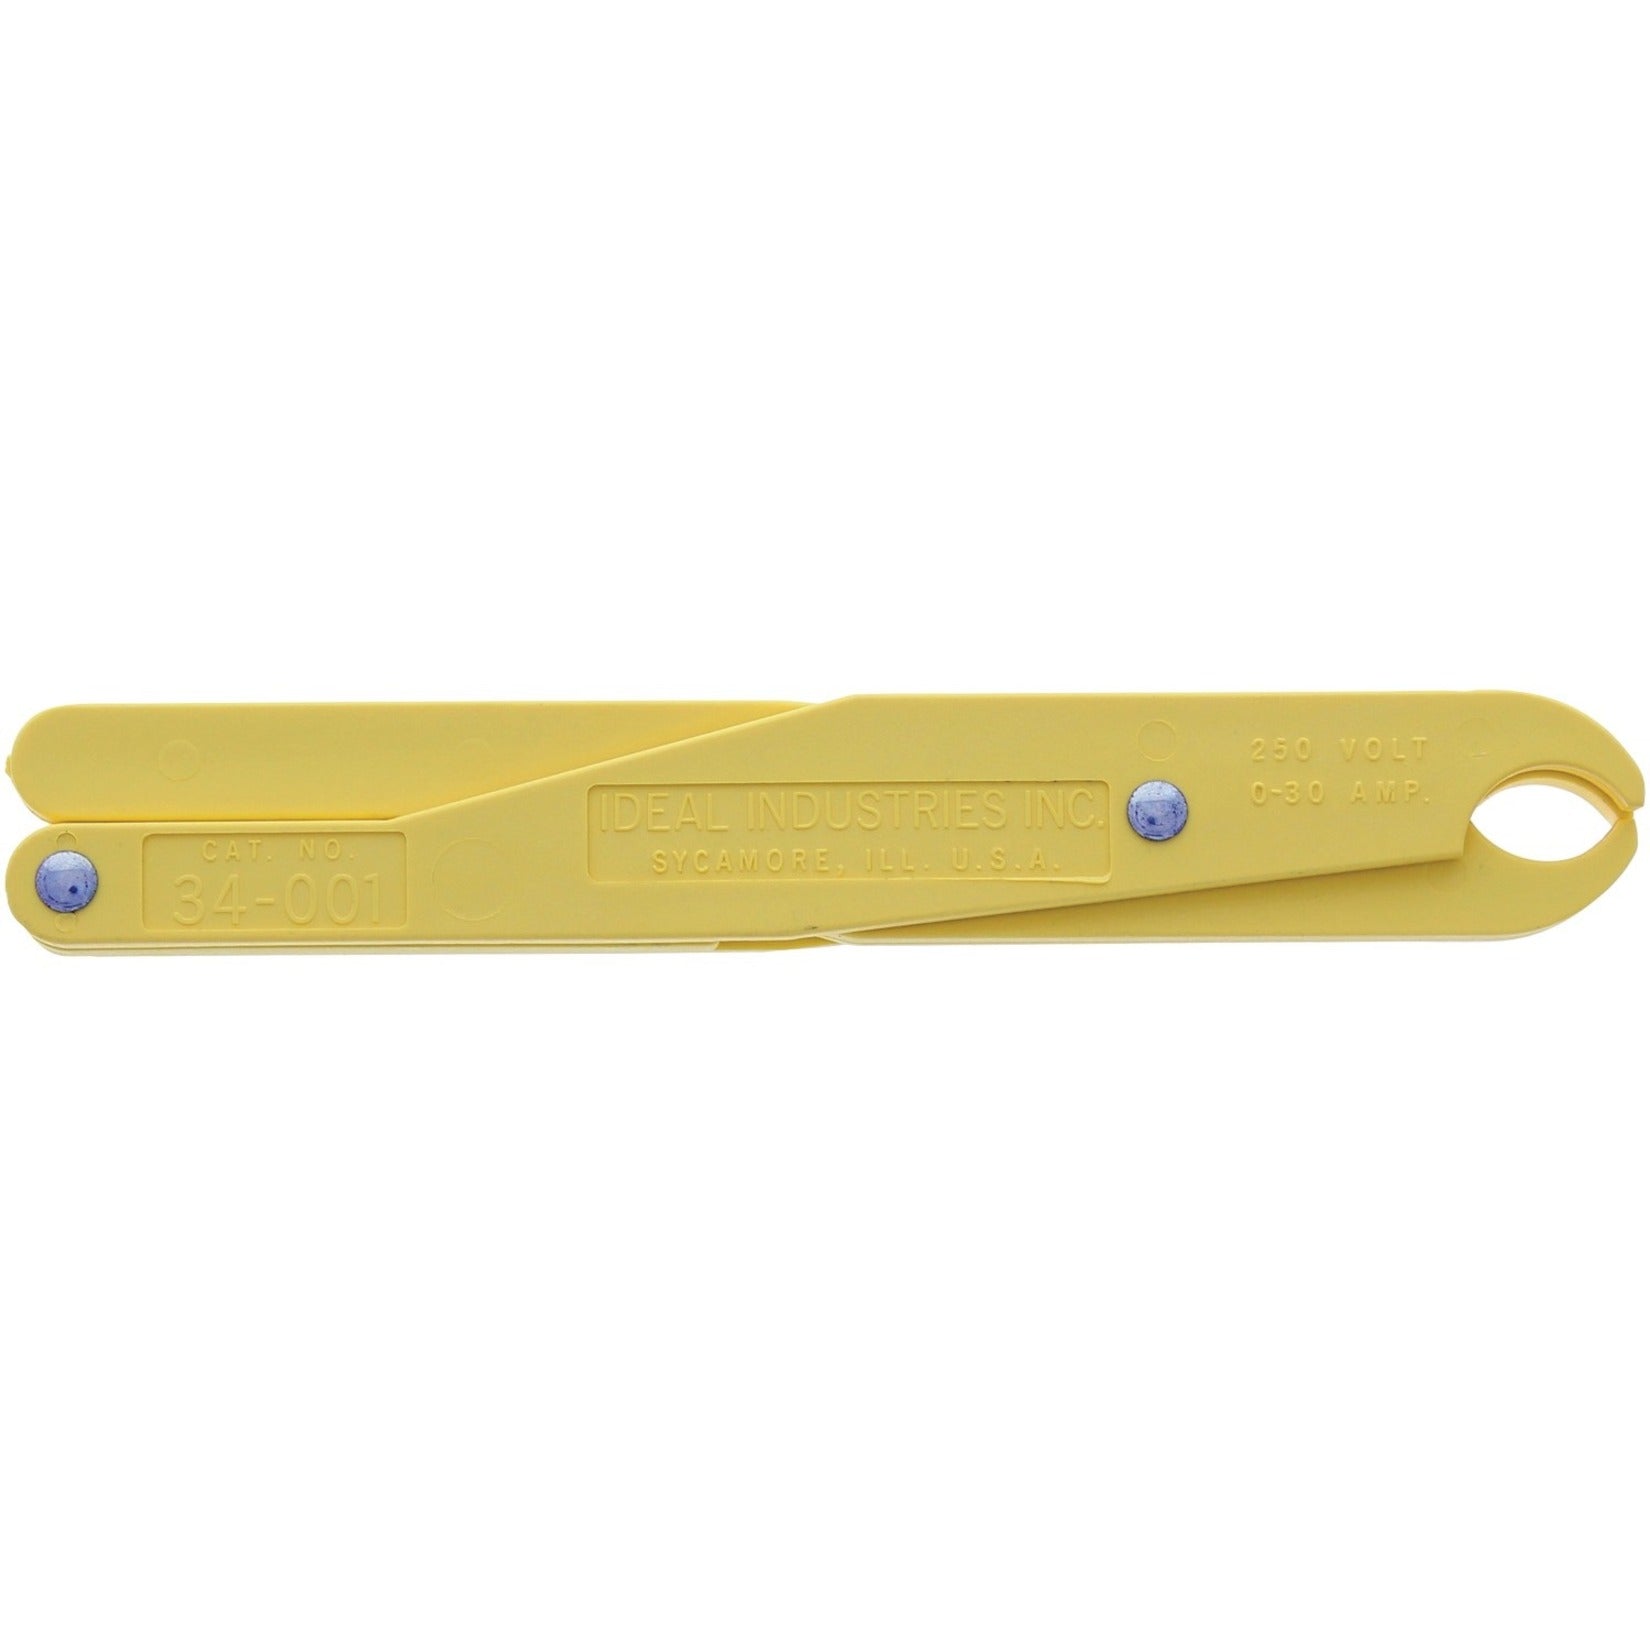 IDEAL 34-001 Safe-T-Grip Fuse Puller, Small - Non-slip Grip